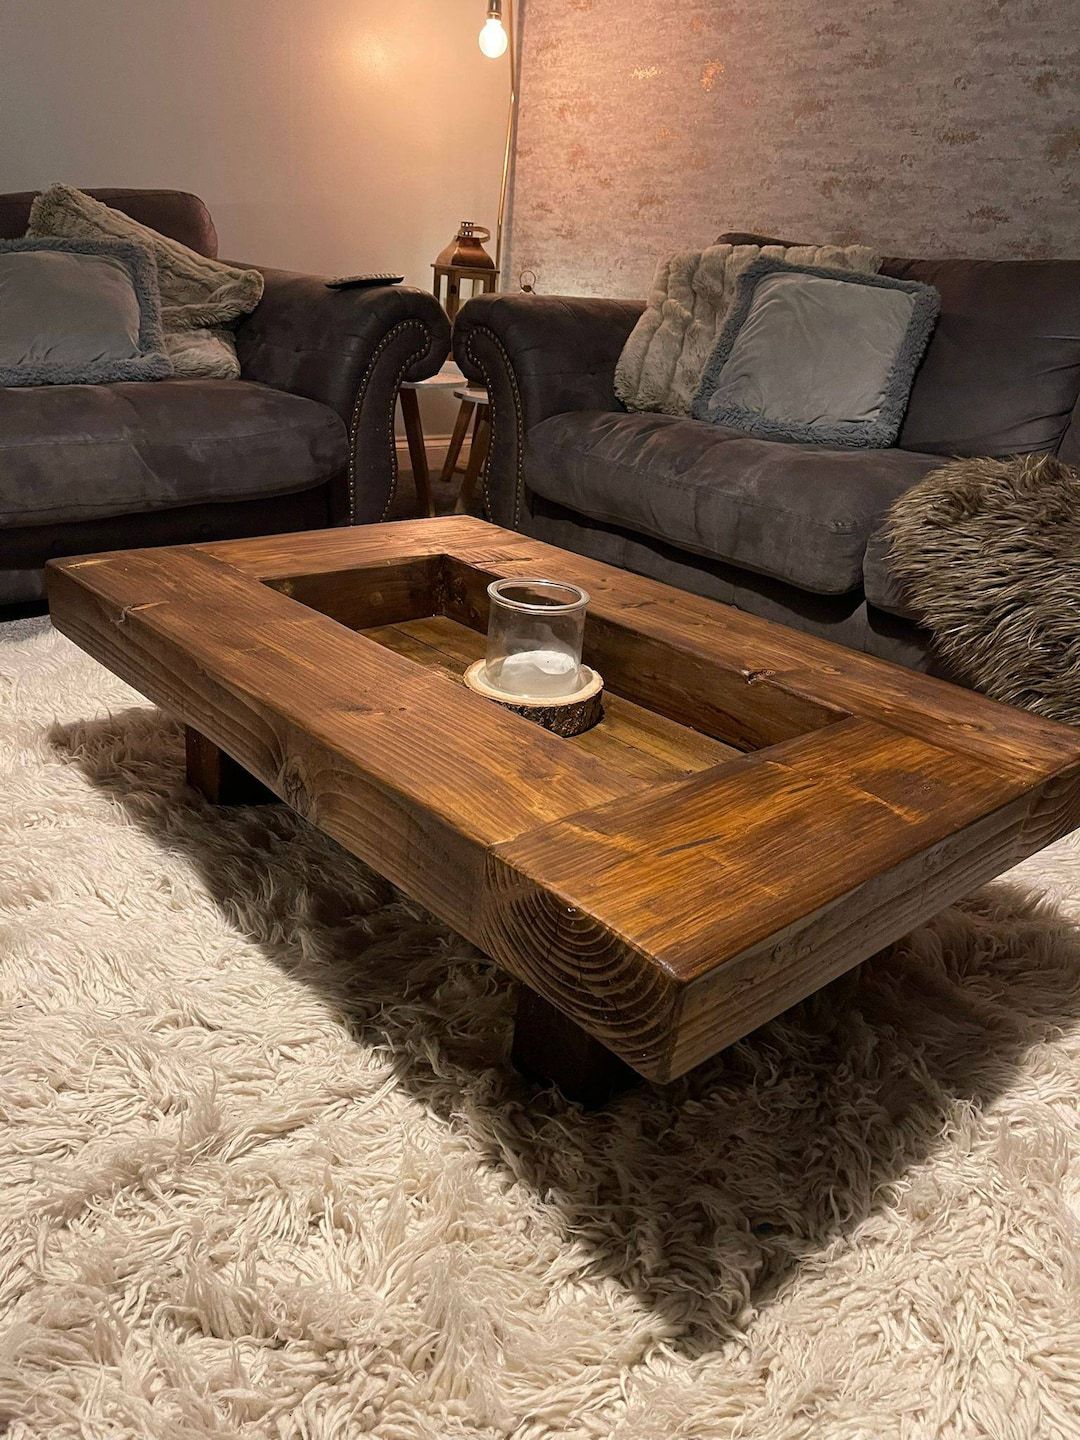 Rustic Handmade Solid Wood Sleeper Coffee Table Xtra Large Xtra Wide  Version – Etsy Regarding Rustic Coffee Tables (View 9 of 15)